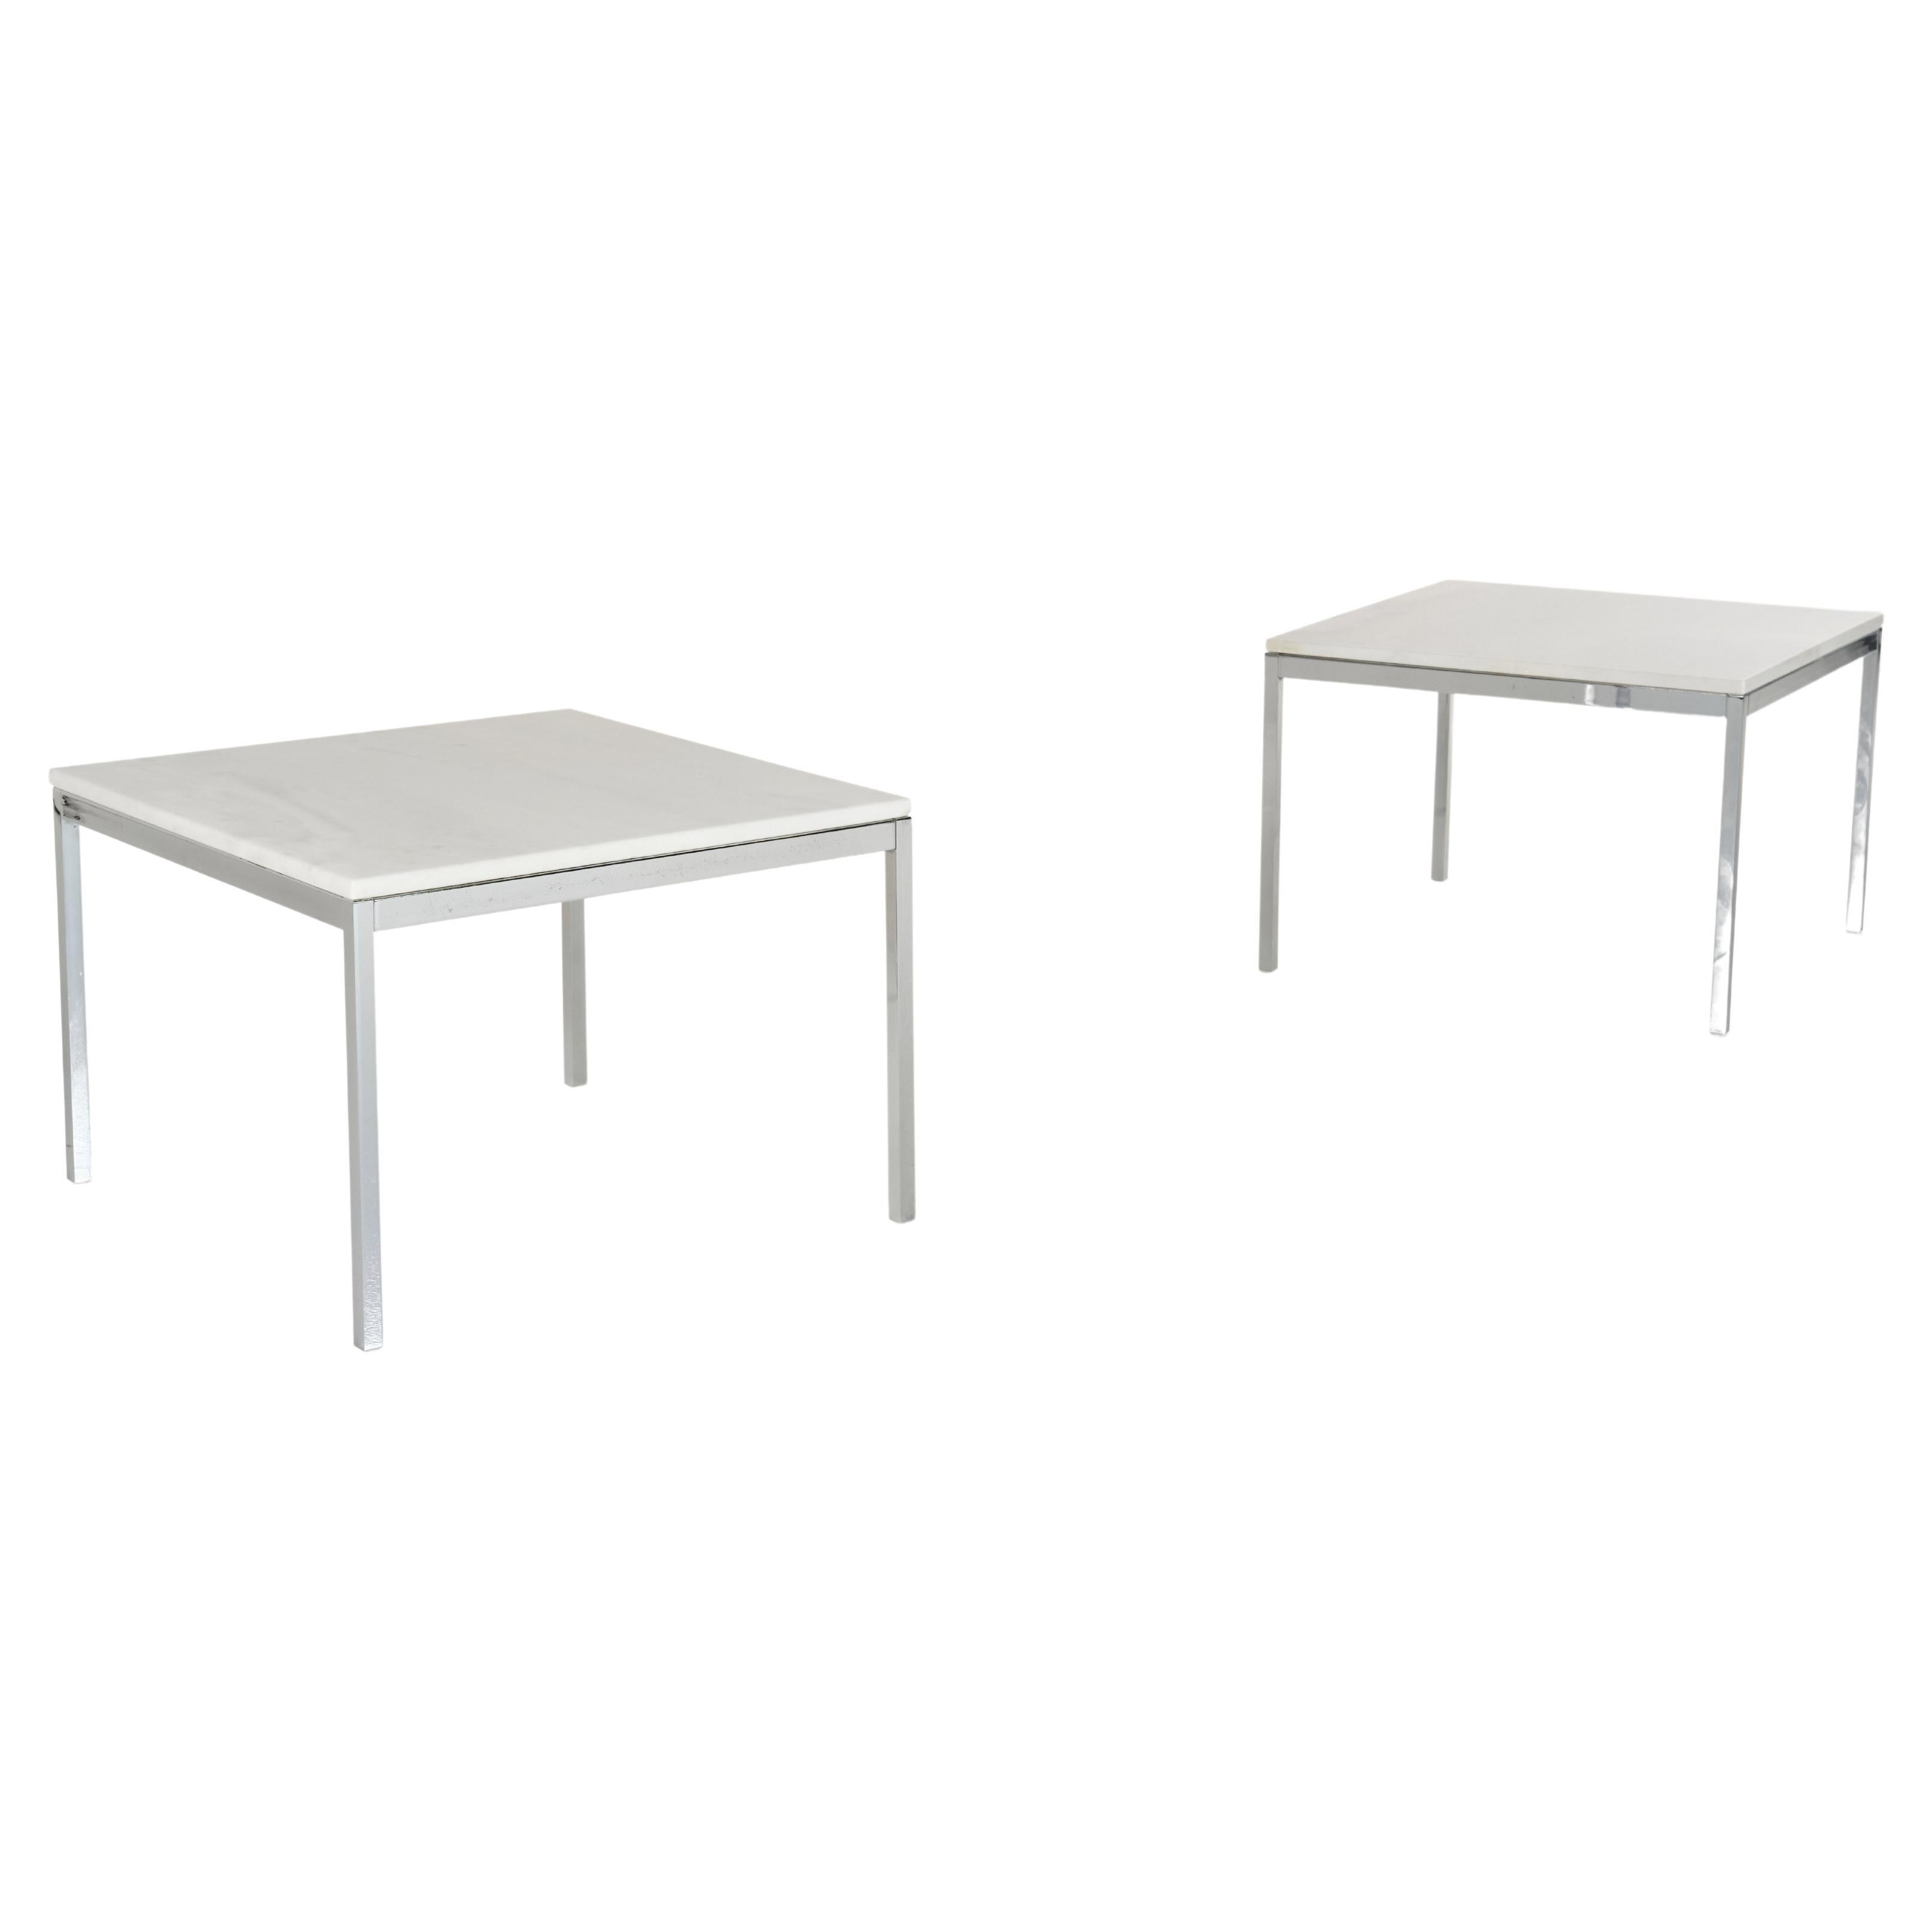 Set of Two Metal and Mar Low Table by Florence Knoll, American Design, 1960s For Sale